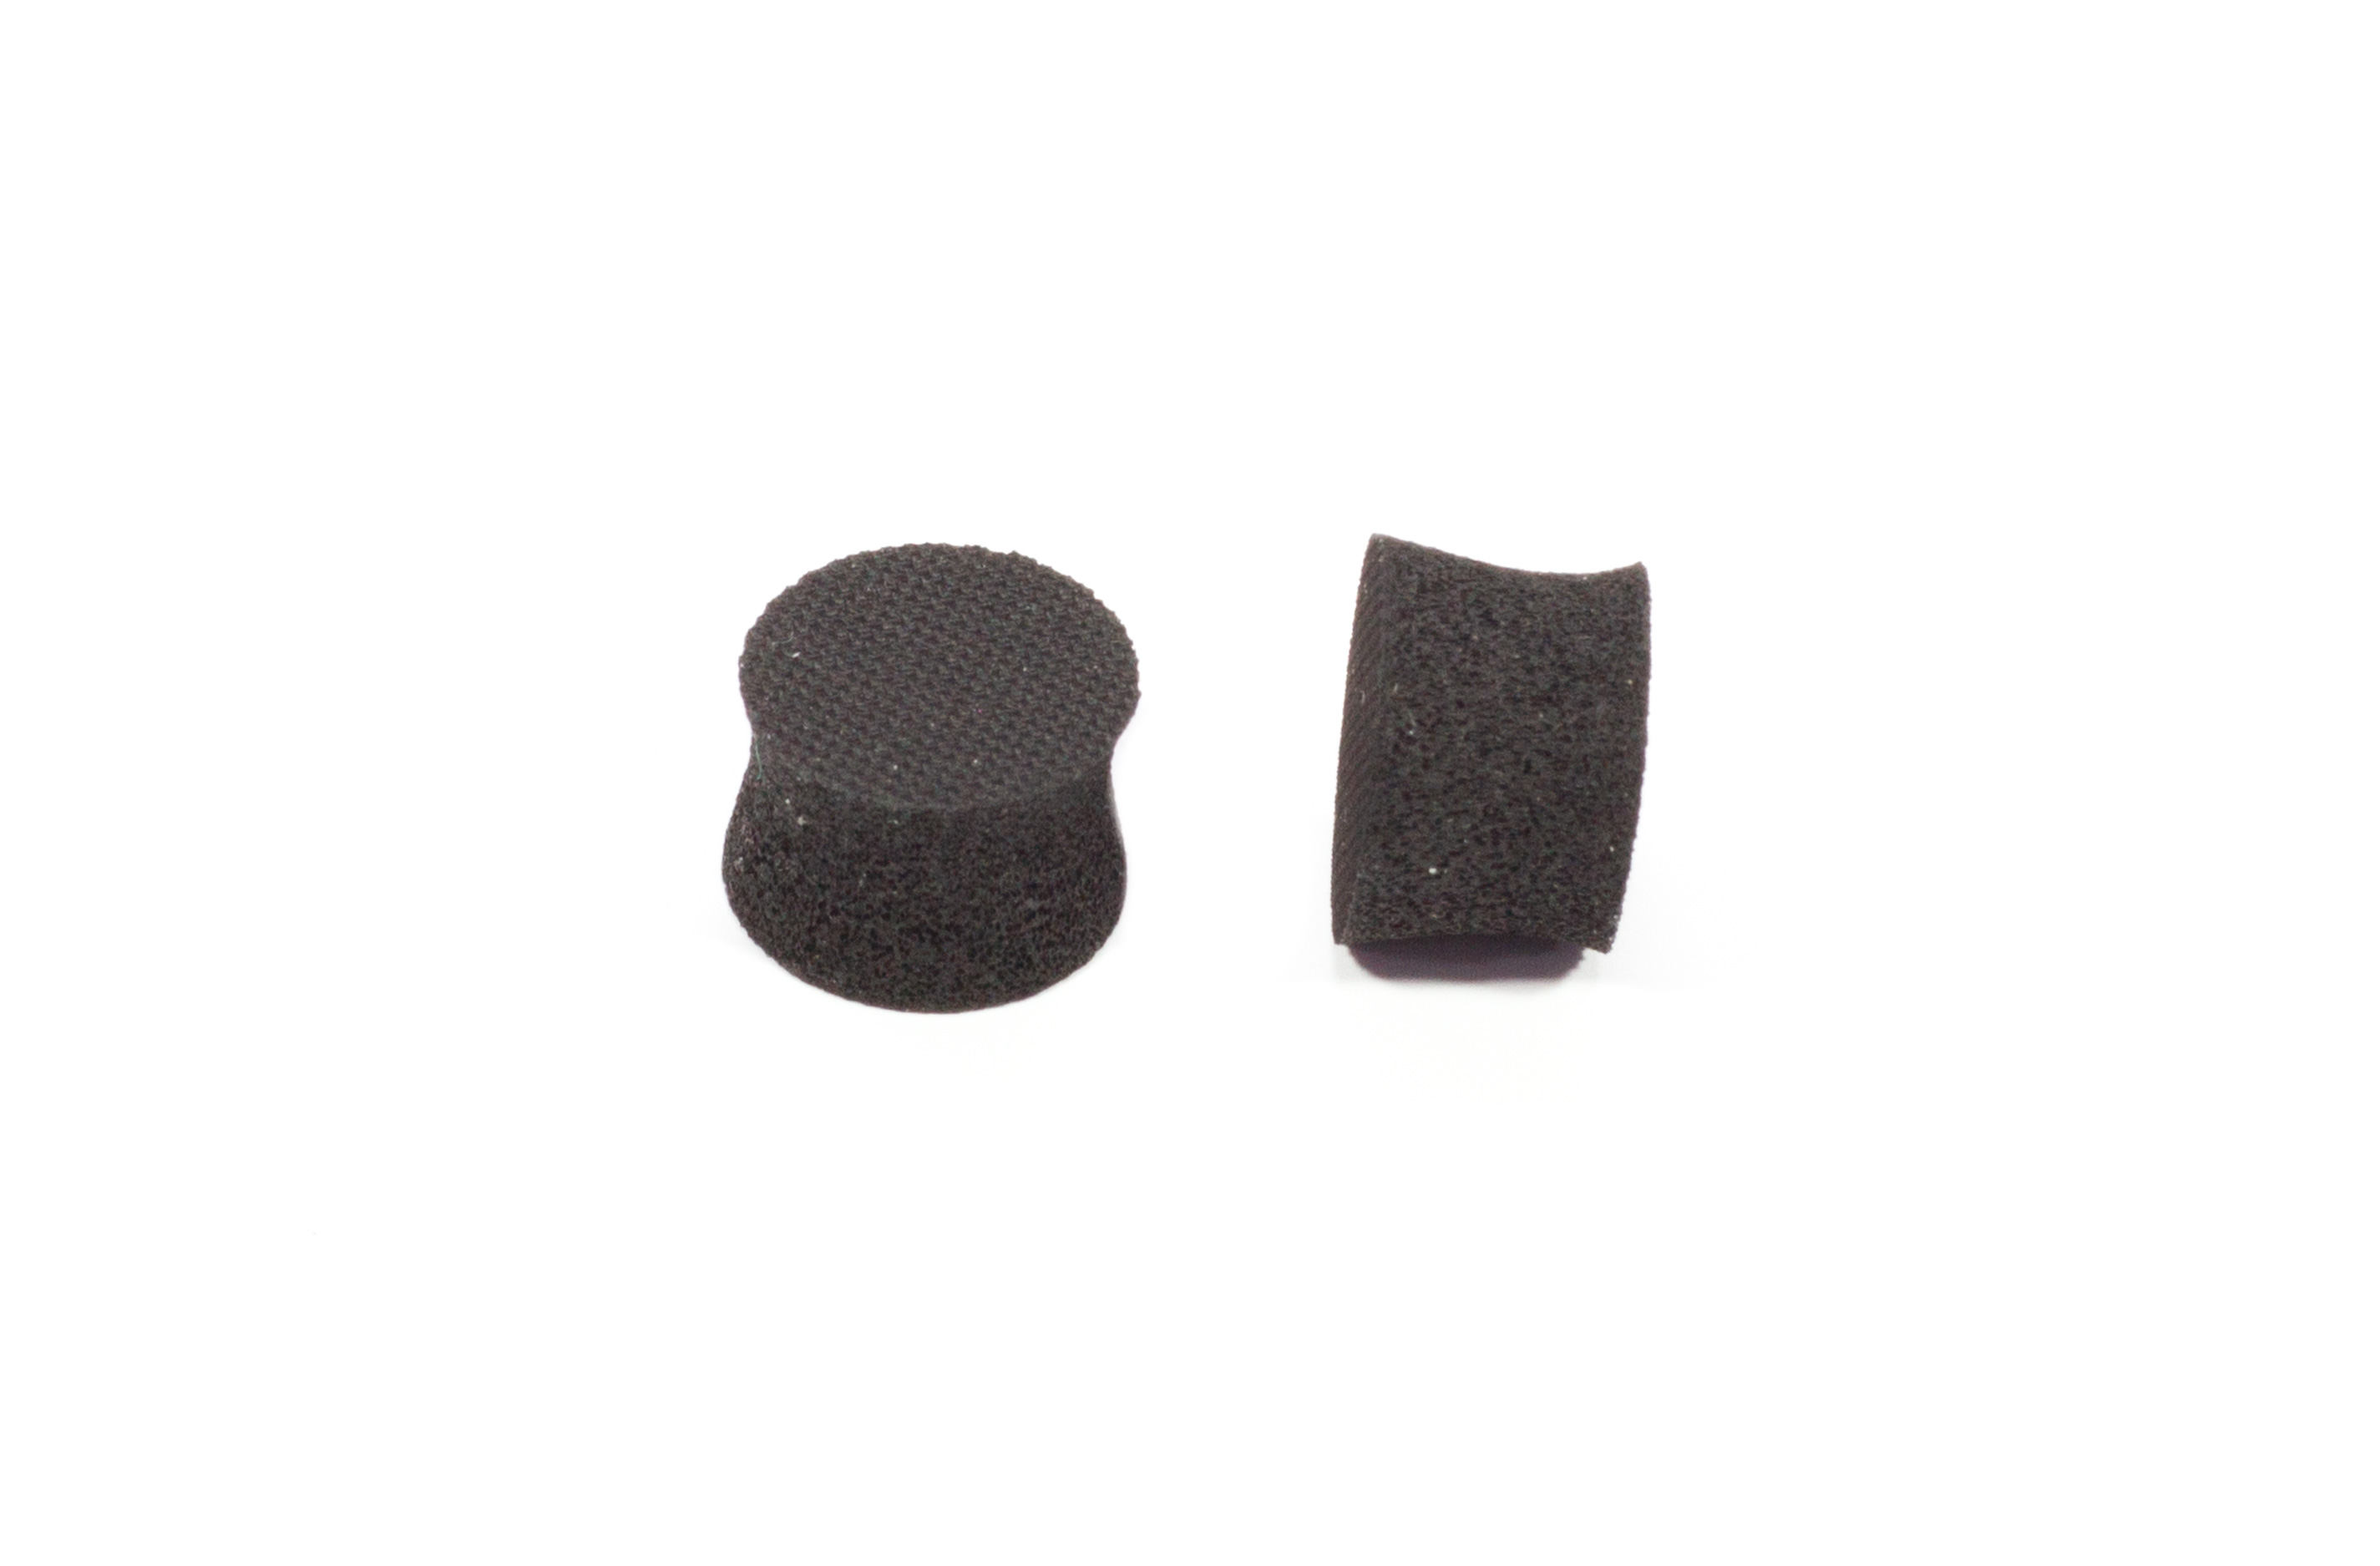 y0987/01 Replacement rubber for Volume compensation no. y0987